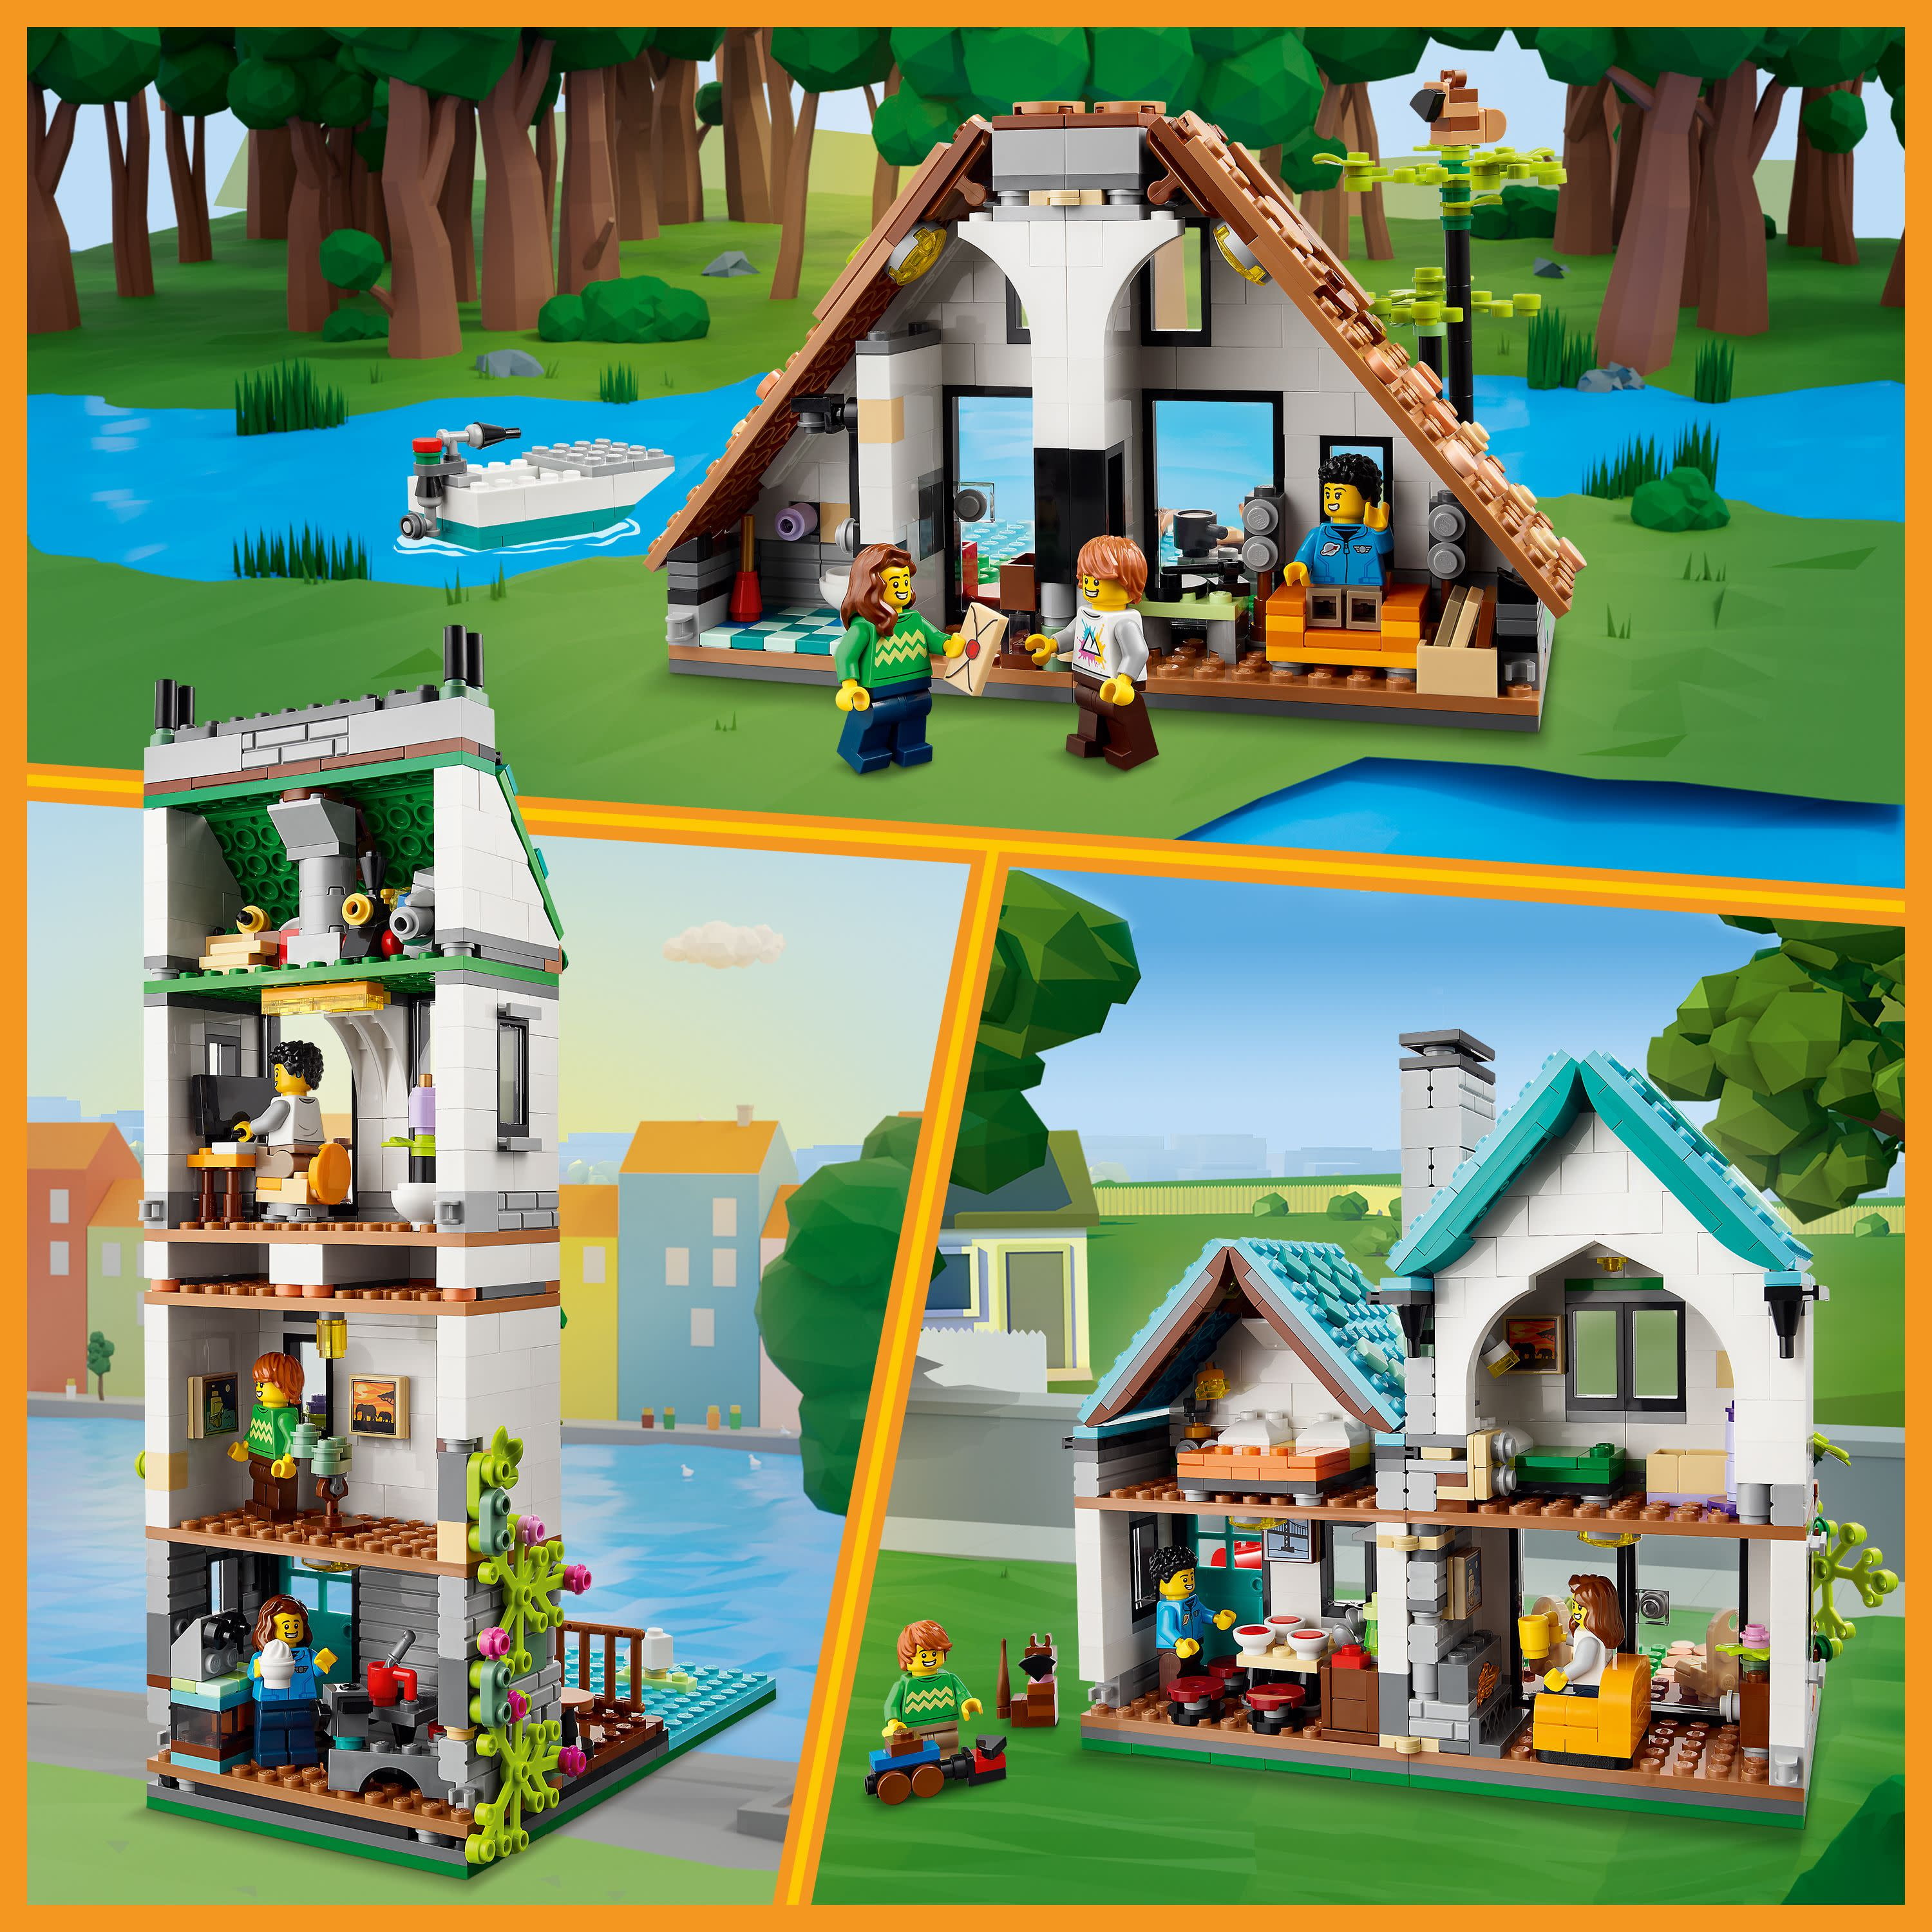 LEGO Creator 3 in 1 Cozy House Building Kit, Rebuild into 3 Different  Houses, Includes Family Minifigures and Accessories, DIY Building Toy Ideas  for Outdoor Play for Kids, Boys and Girls, 31139 